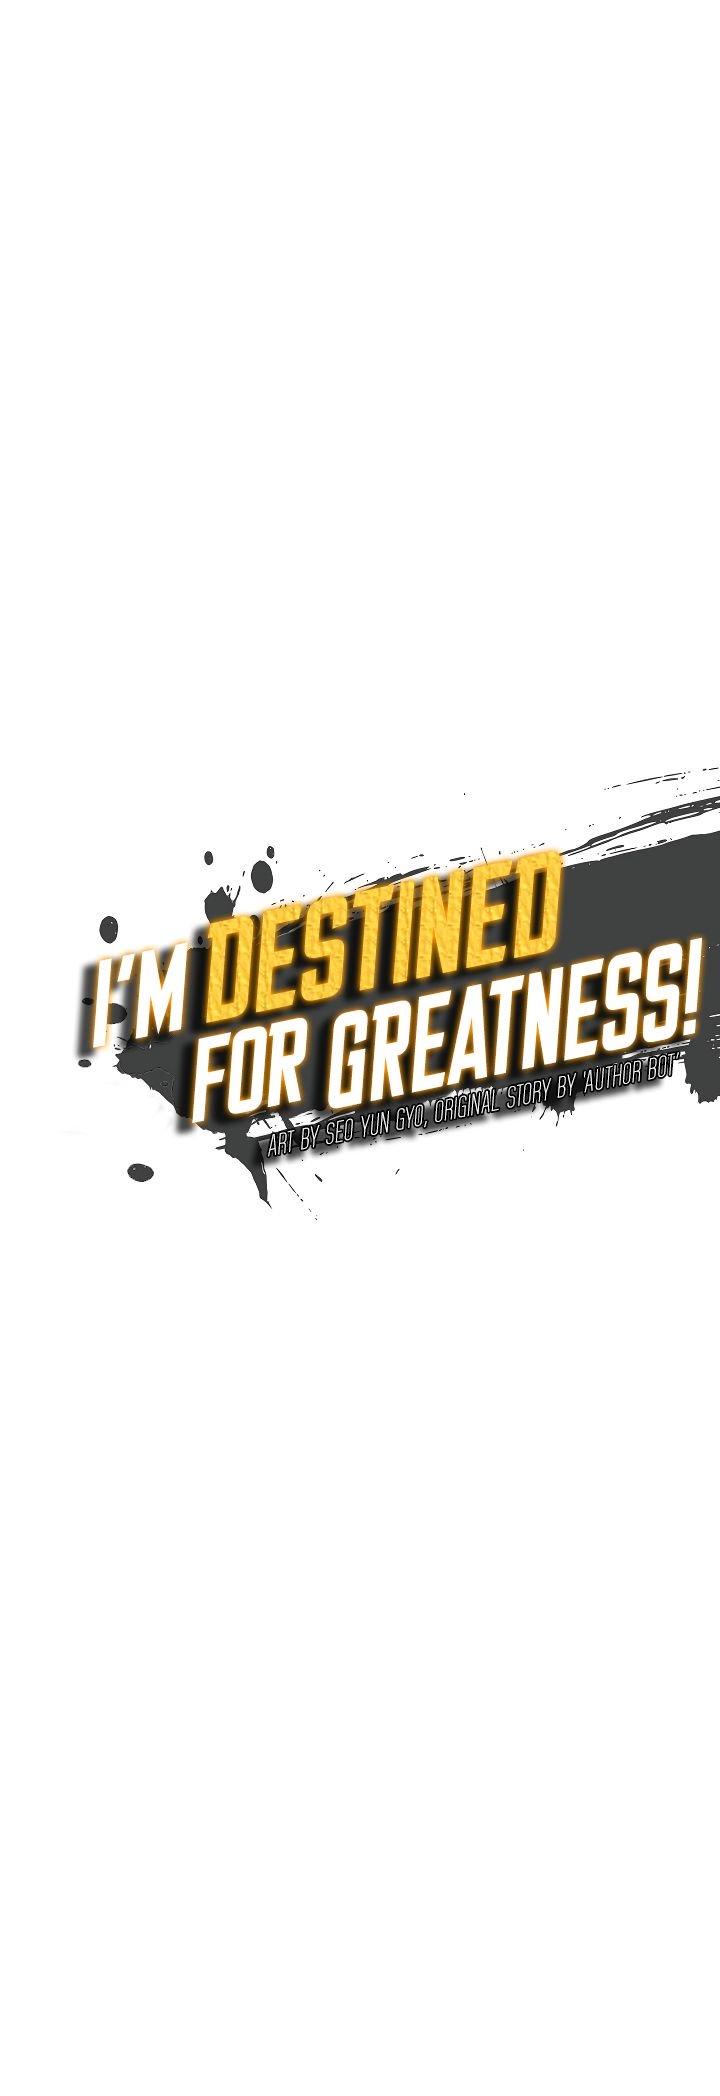 im_destined_for_greatness_24_4